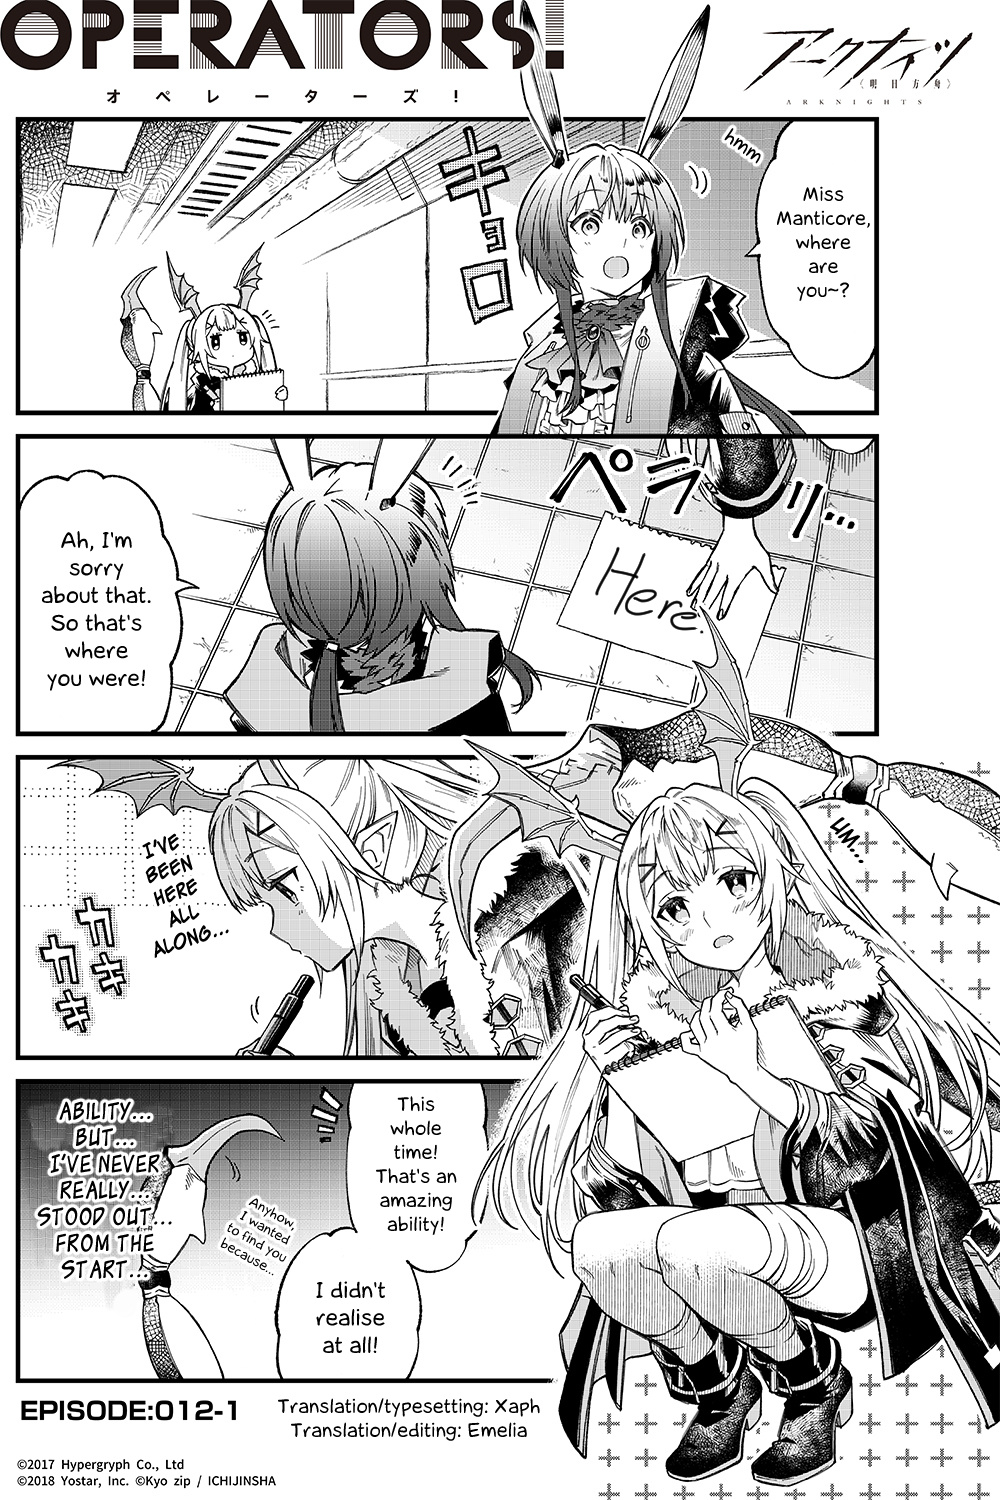 Arknights: Operators! Chapter 12.1 #1